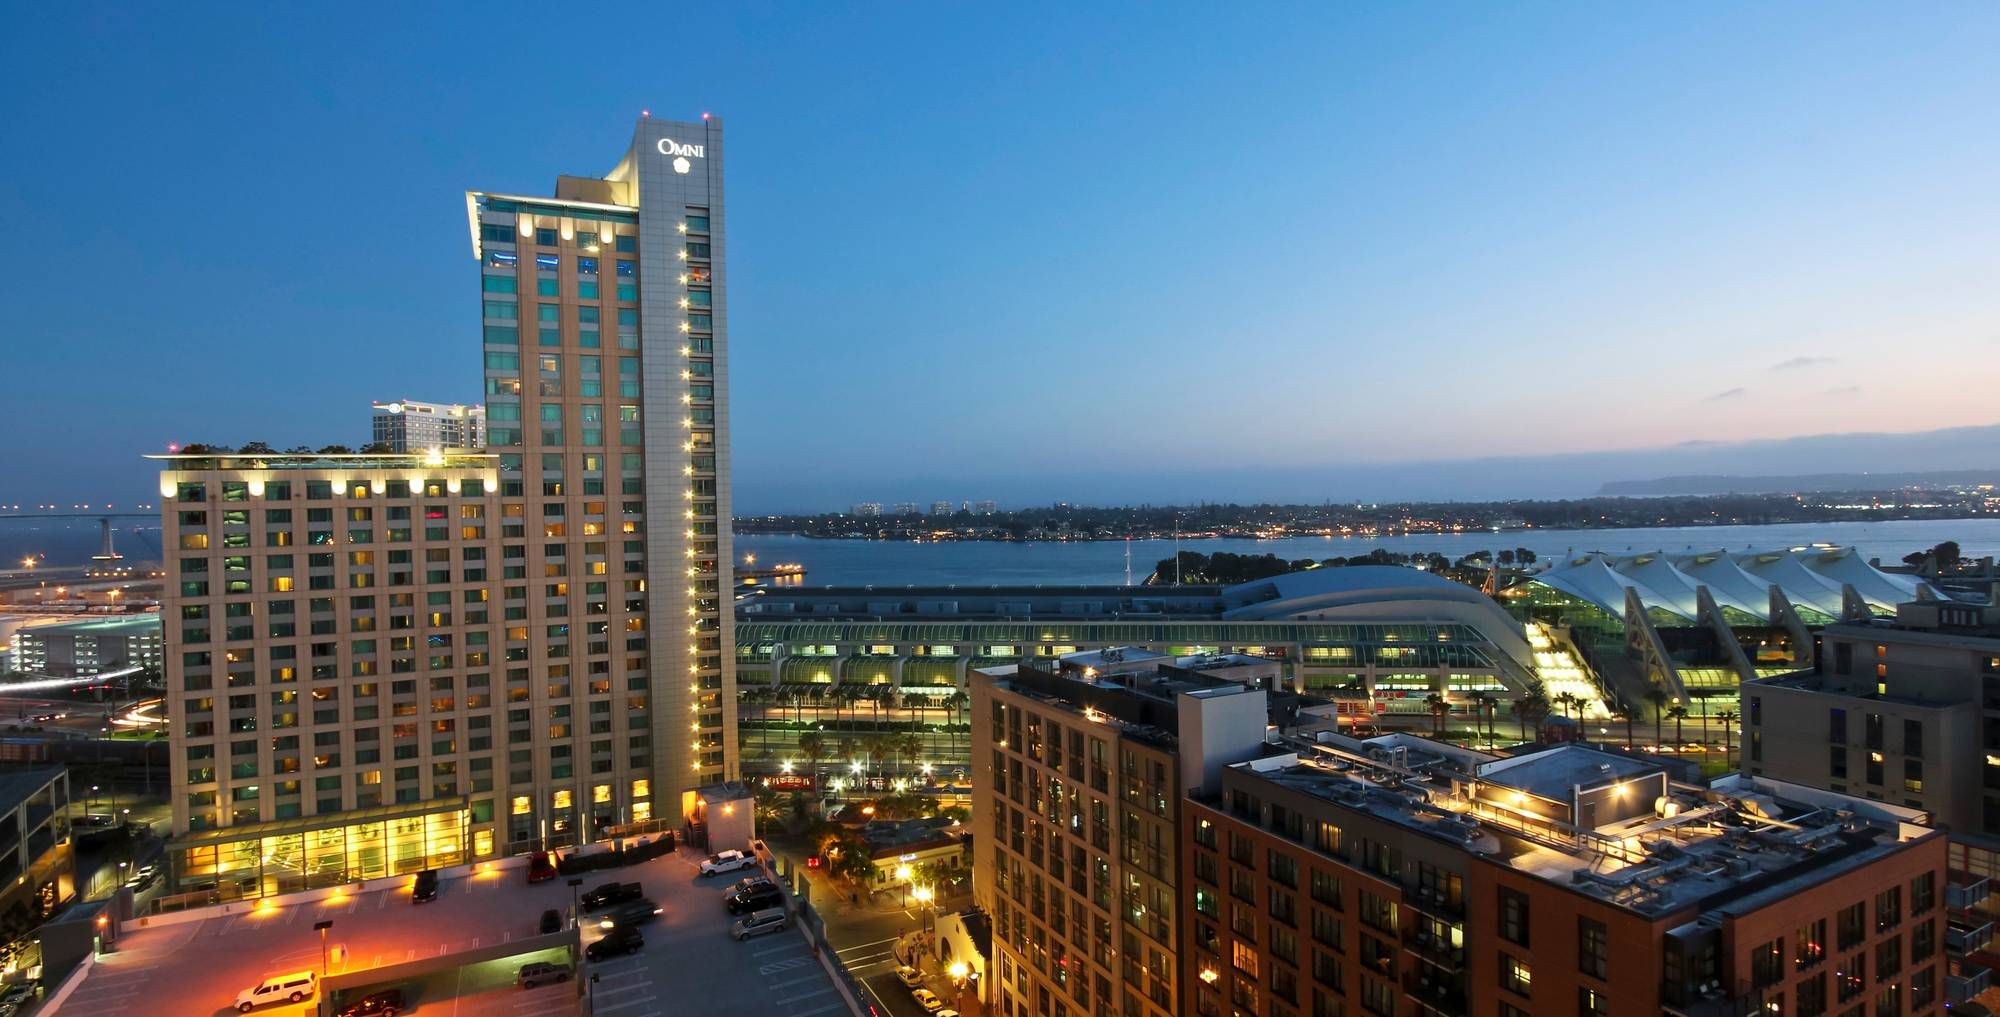 Omni hotels allegedly use deceptive hotel price listings.